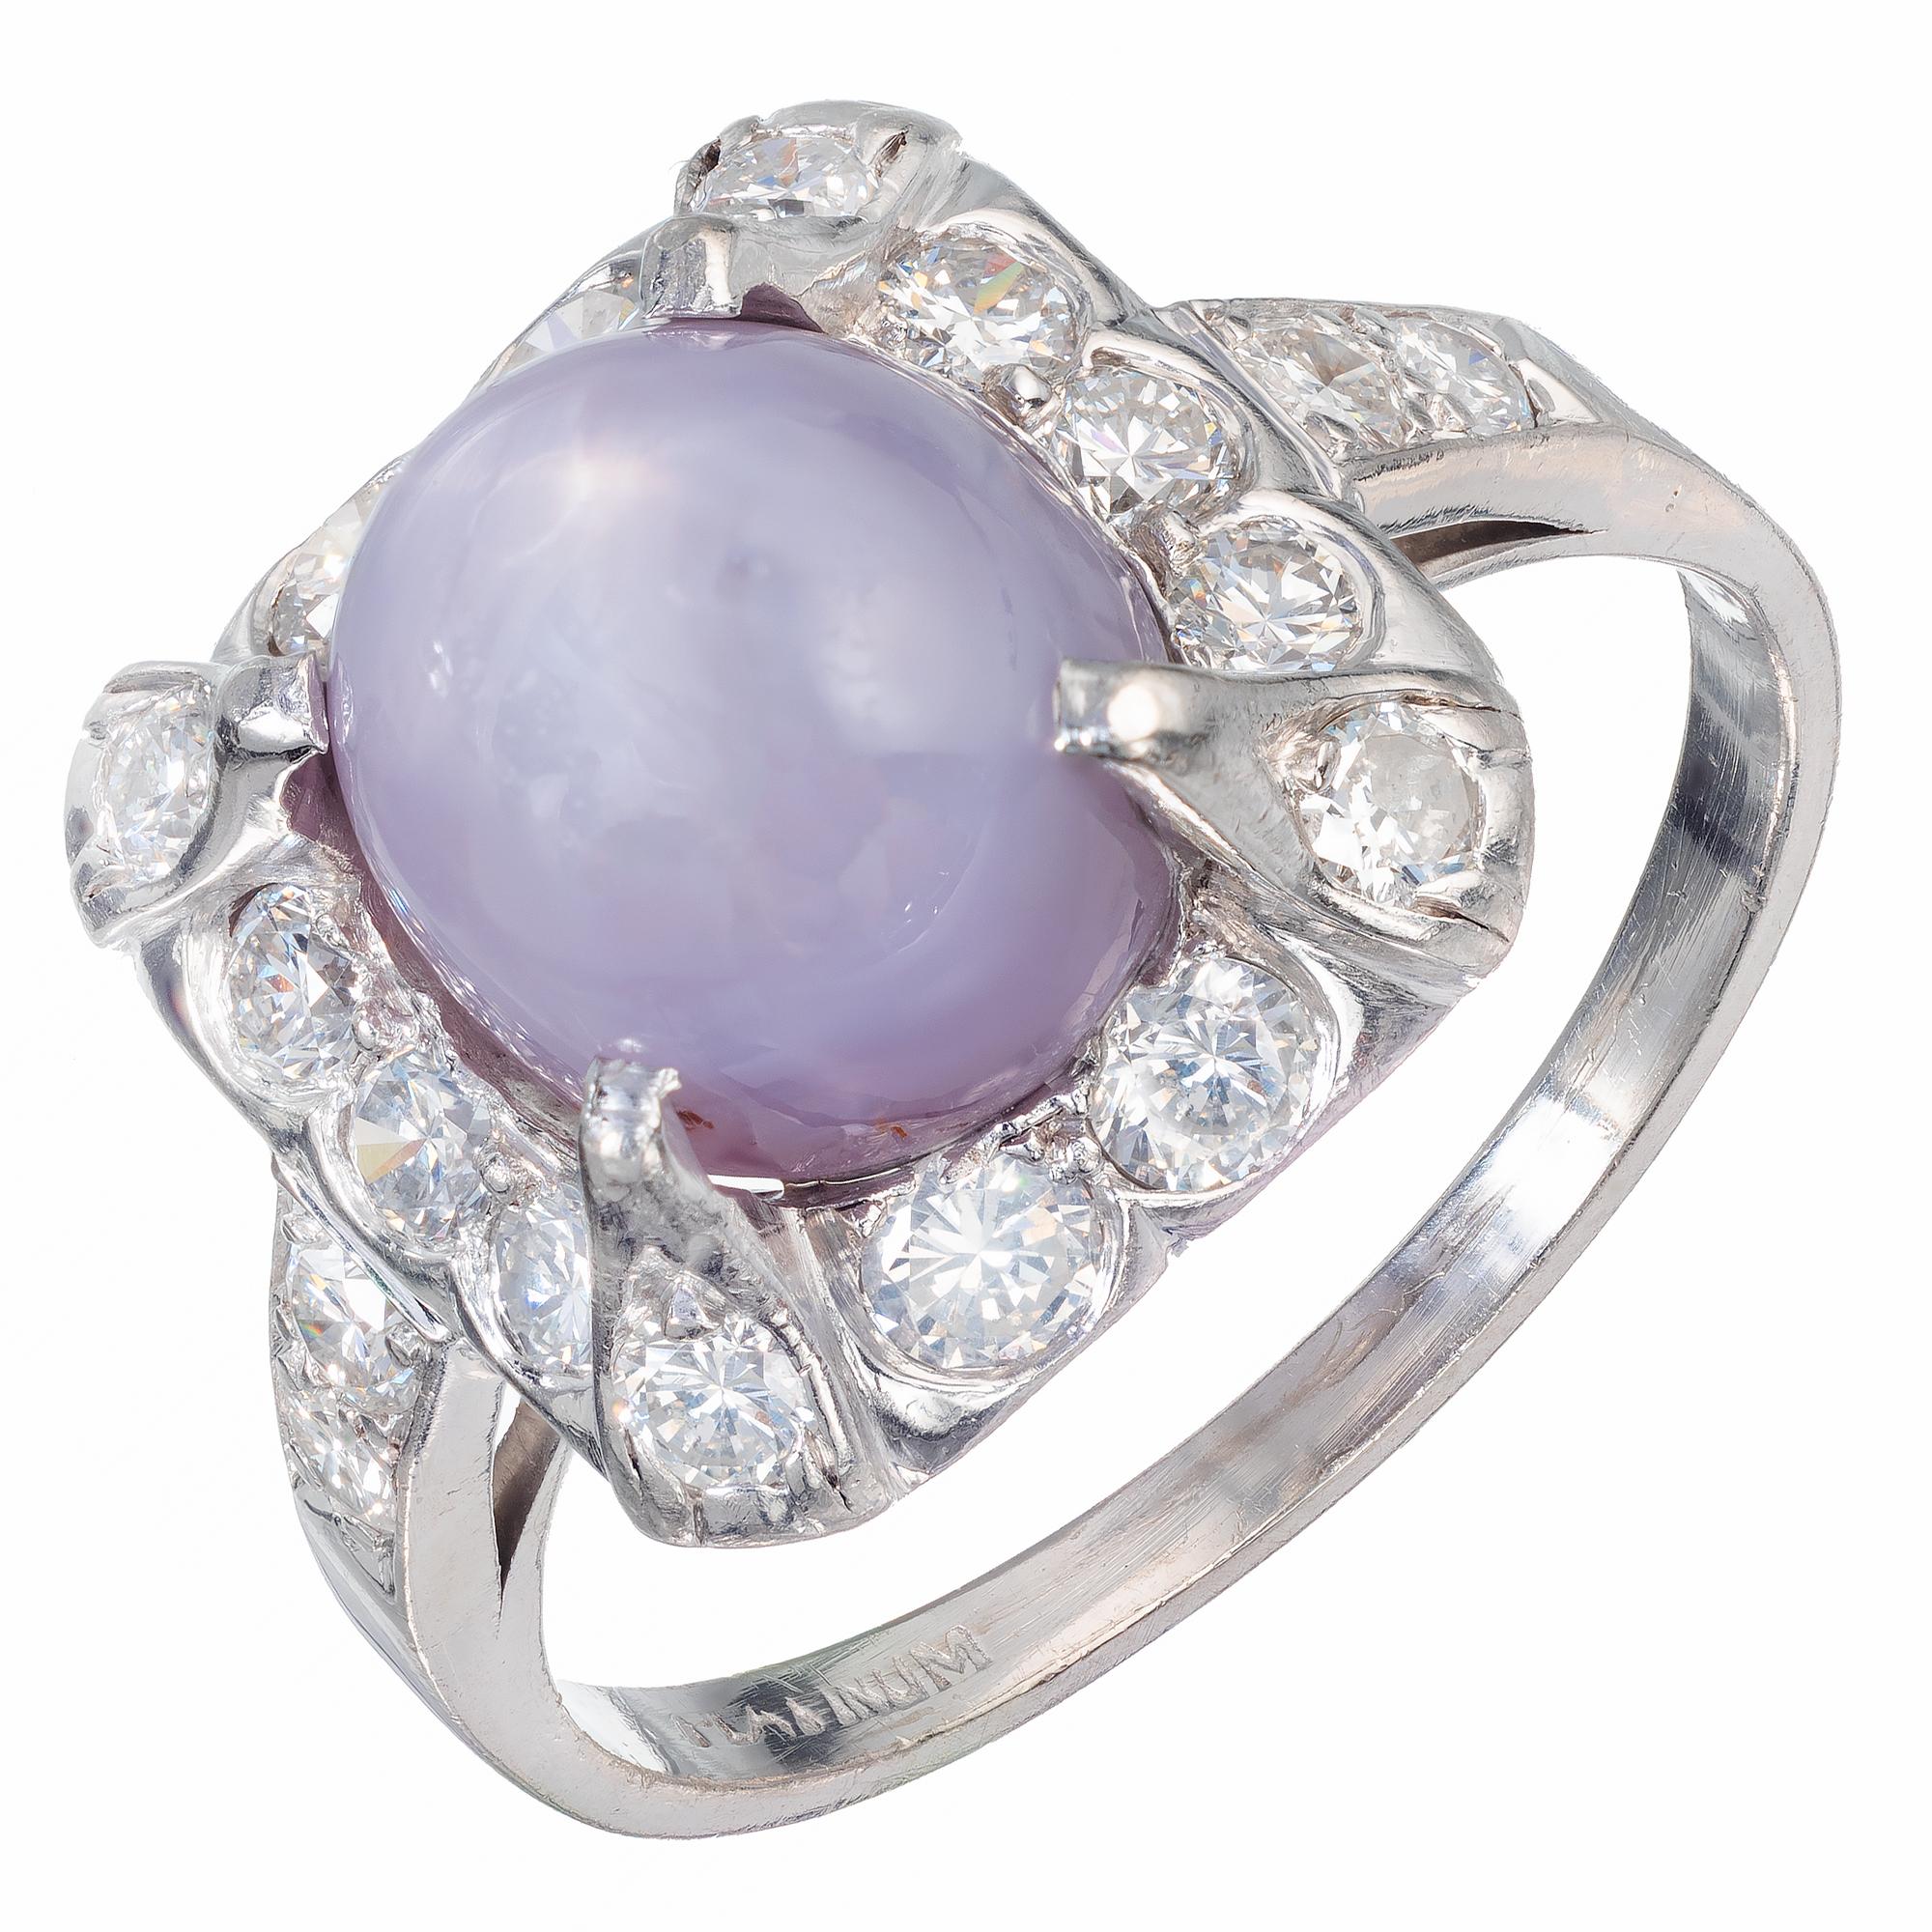 GIA Certified light violet translucent star sapphire and diamond engagement ring. circa 1940. Set in platinum with a round diamond halo.

1 oval natural light violet display asterism star sapphire, Approximate 7.40cts GIA Certified 2195777357
18